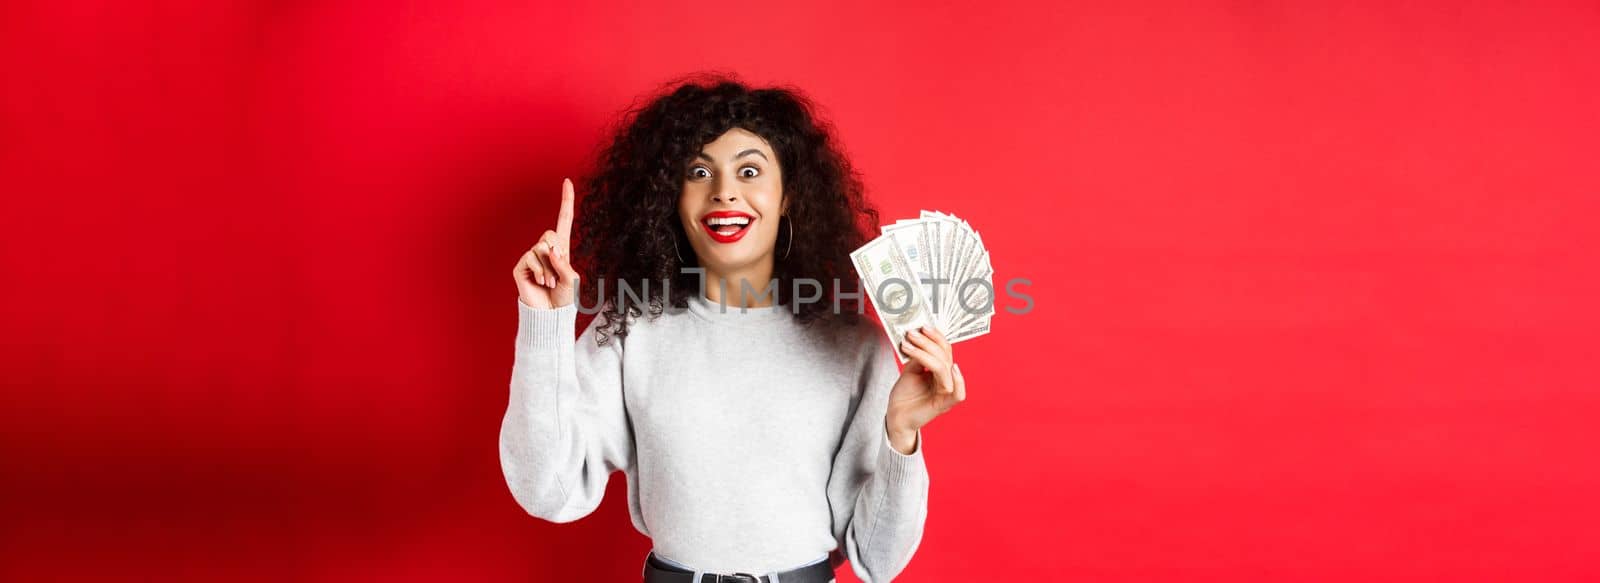 Young excited woman having an idea how make money, showing dollar bills and raising finger in eureka sign, standing on red background.